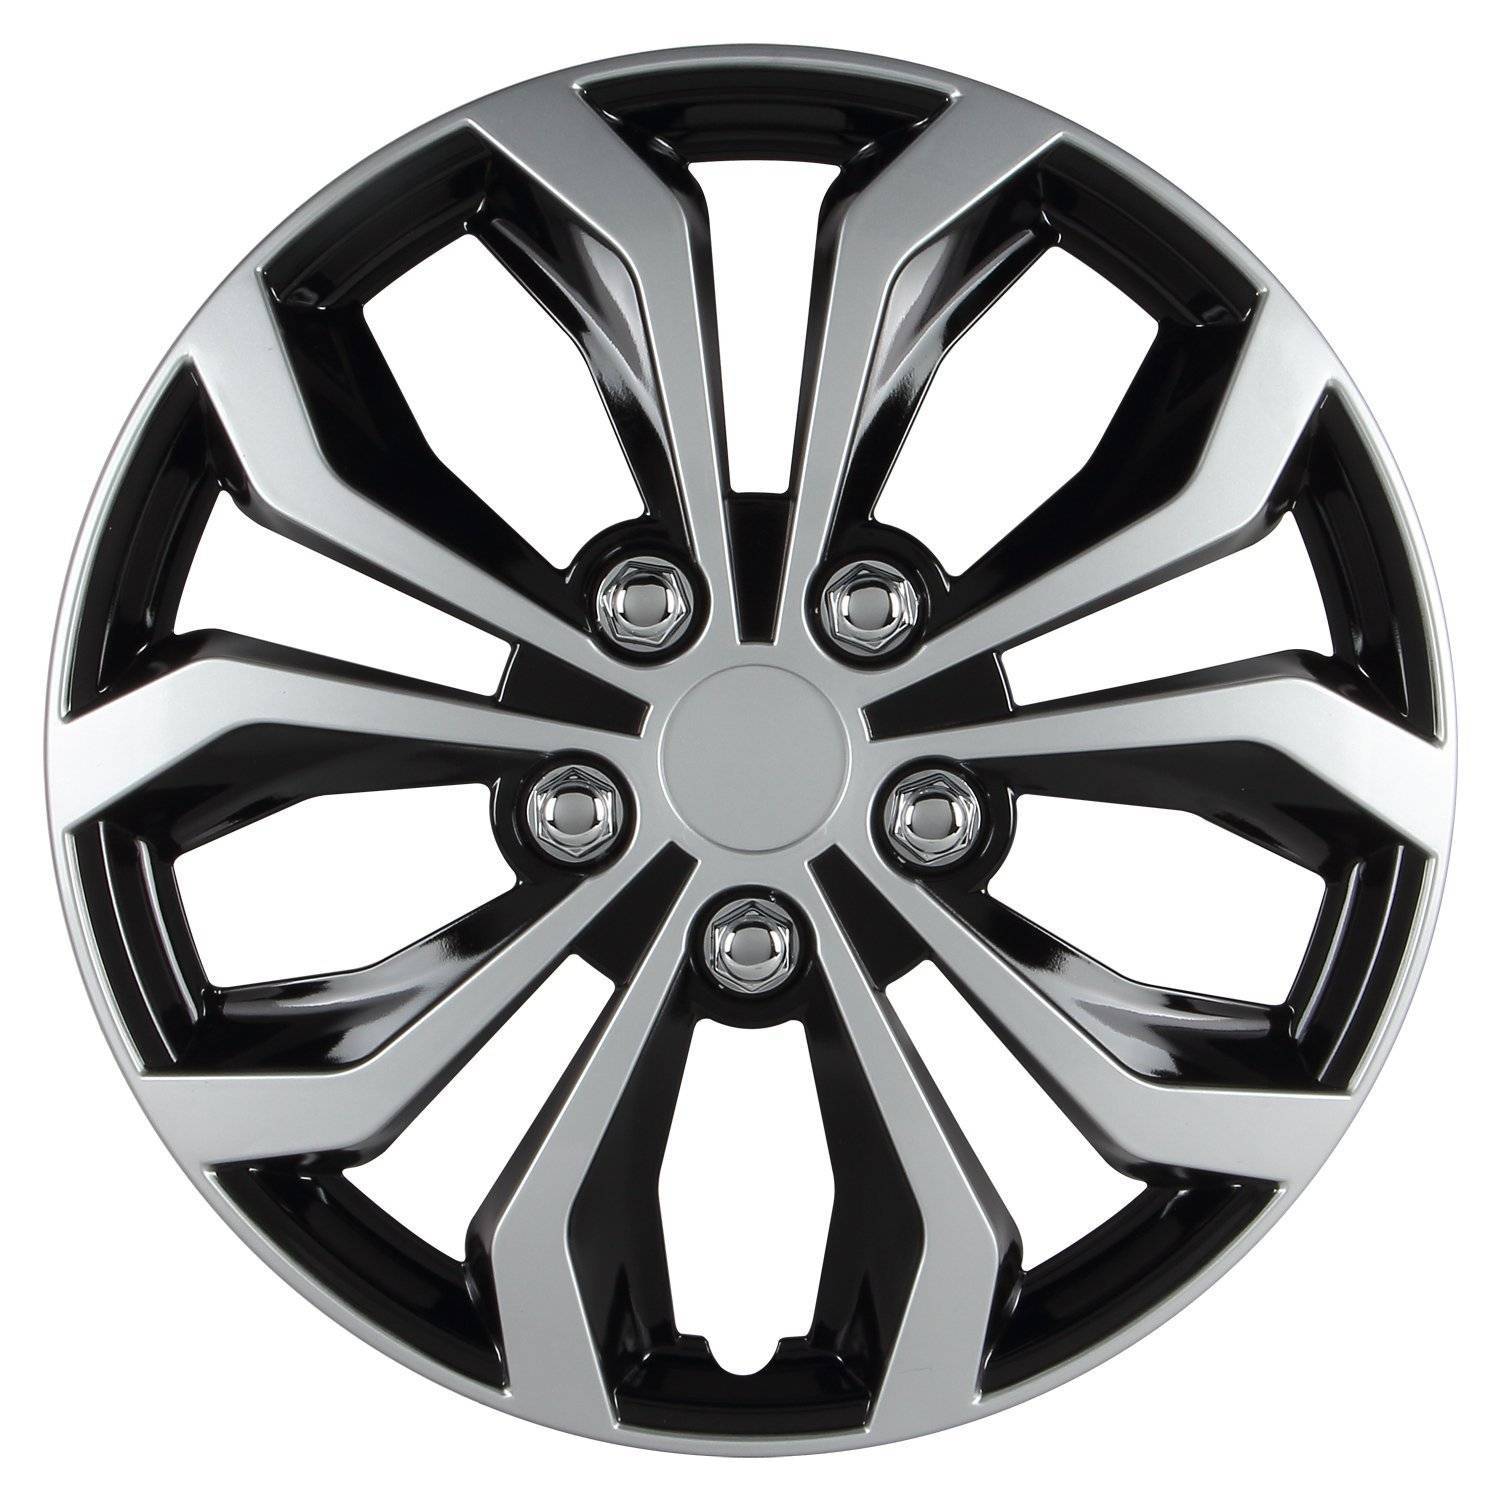 Pilot WH553-14S-BS Universal Fit Spyder Black/Silver Finish 14 Inch Wheel Covers - Micro - Set of 4 - Car Parlour